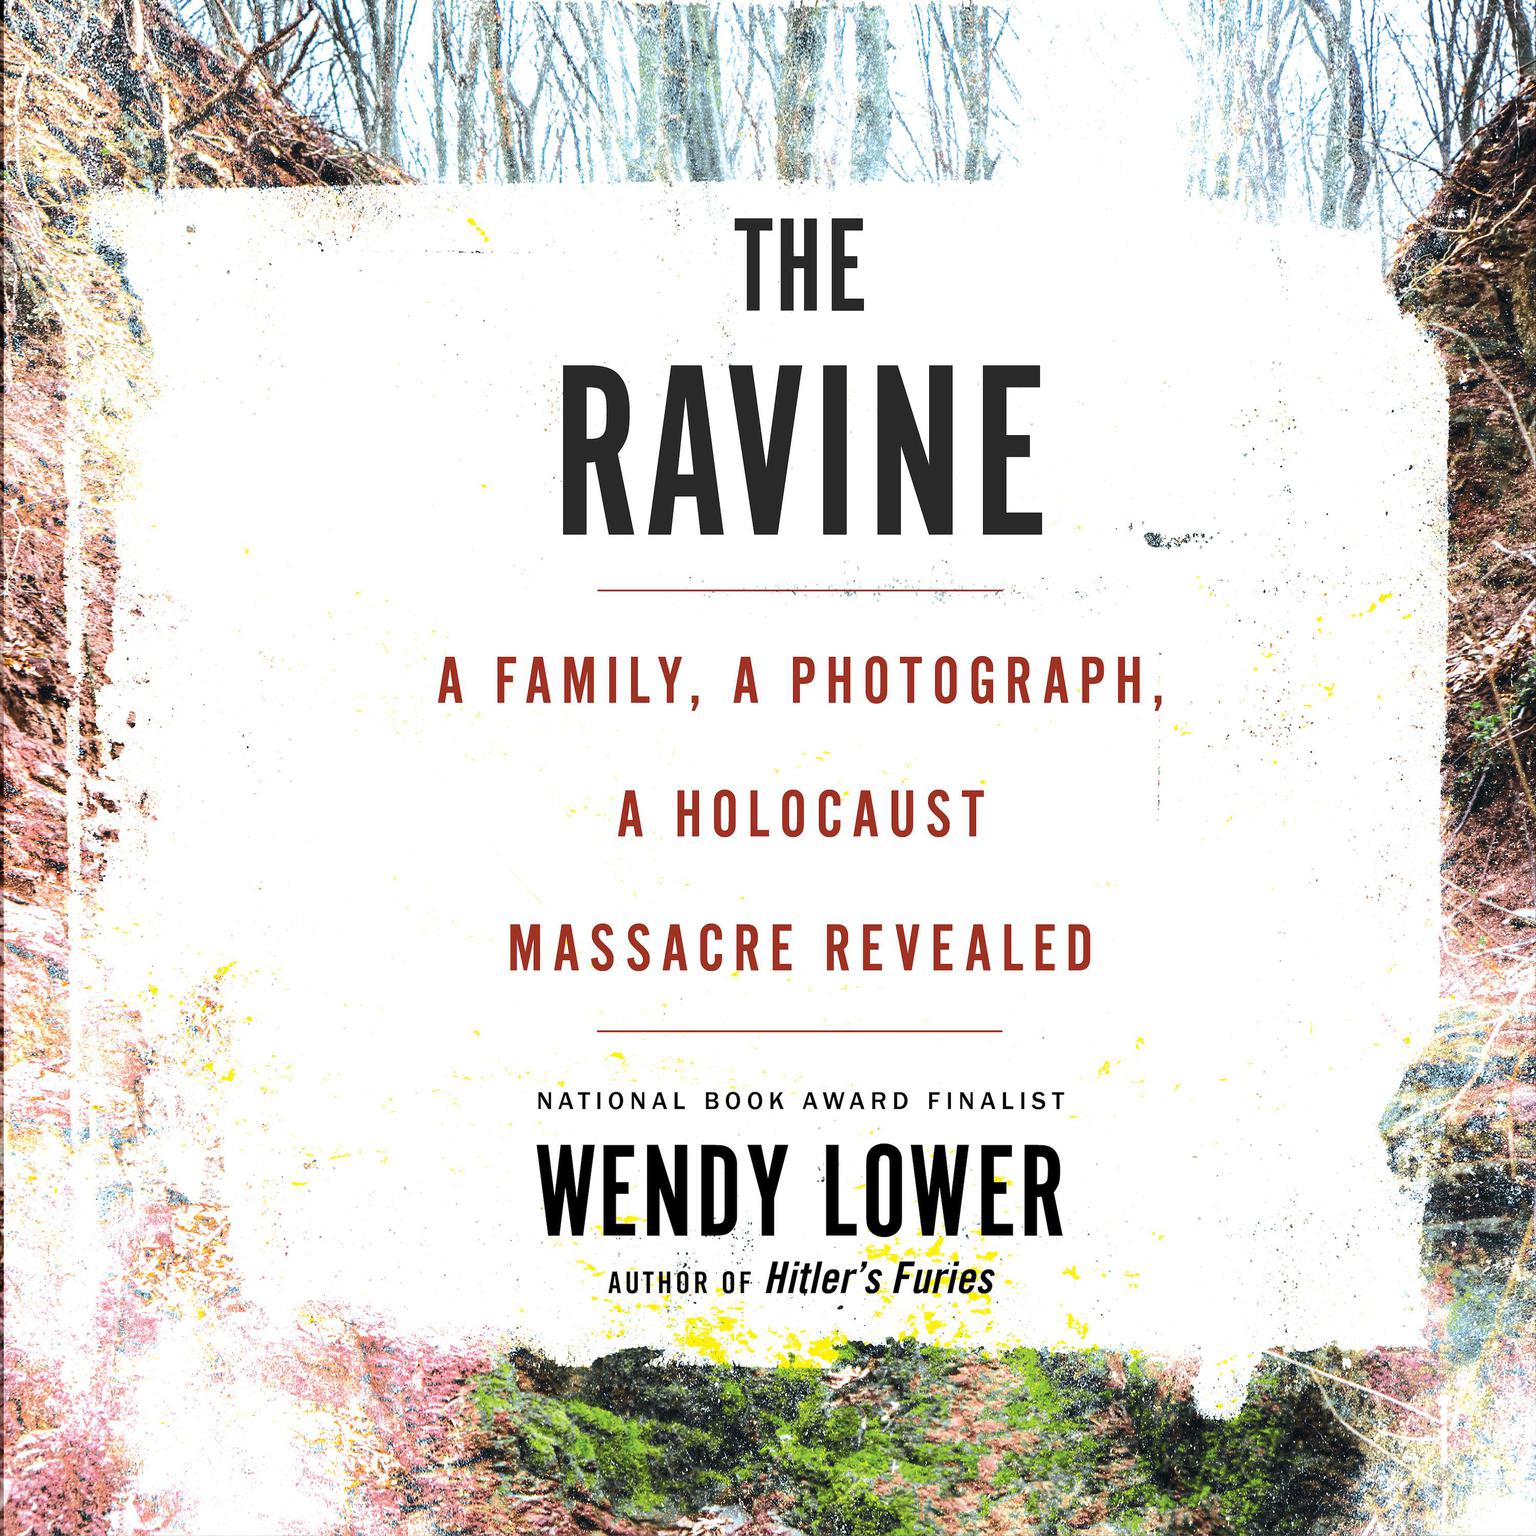 The Ravine: A Family, a Photograph, a Holocaust Massacre Revealed Audiobook, by Wendy Lower